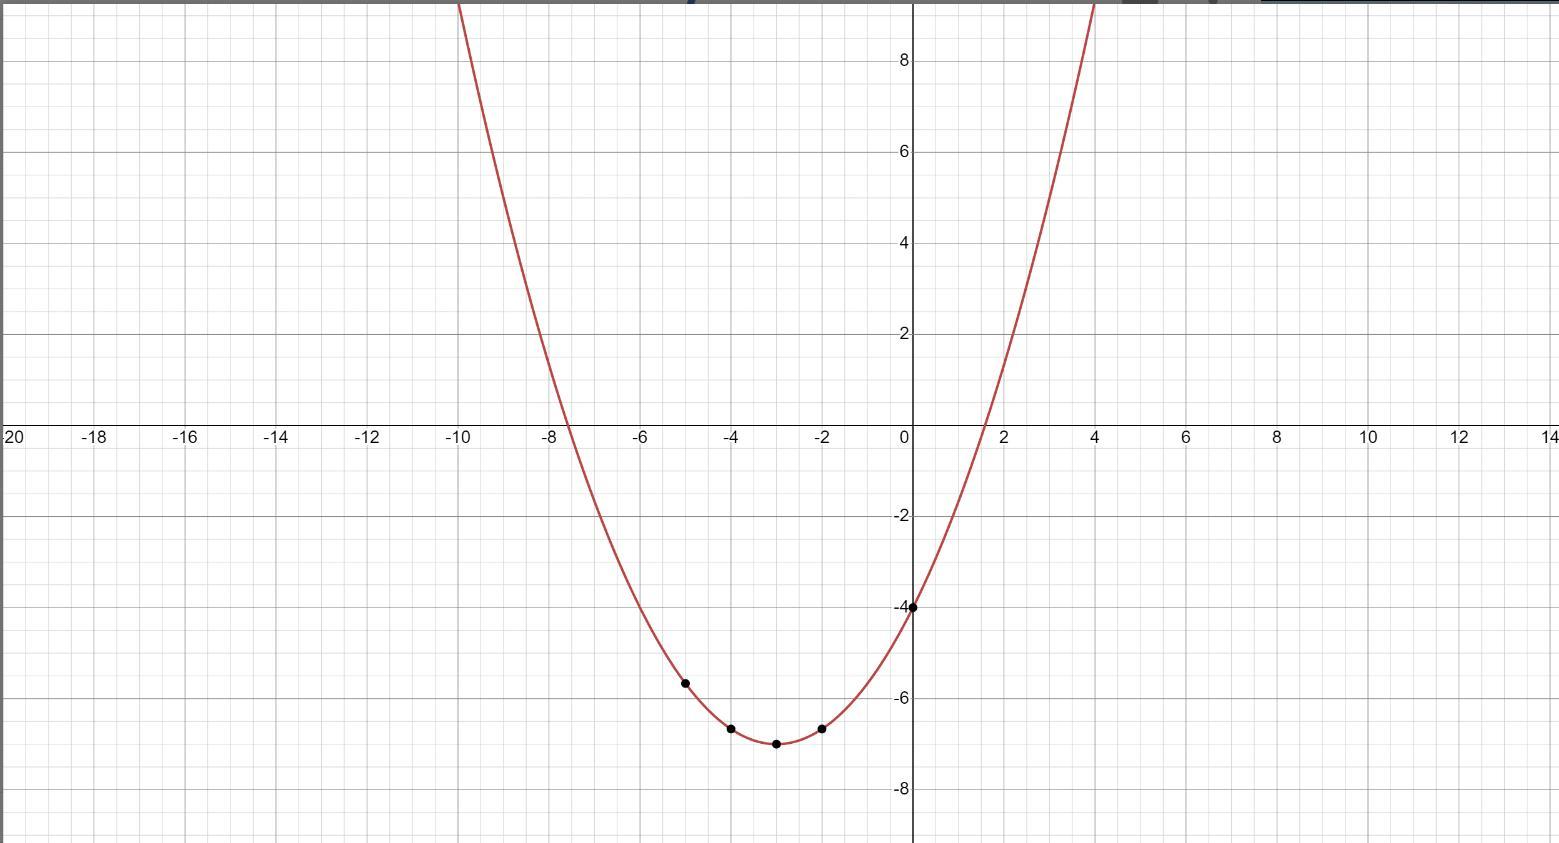 Graph The Function.h(x)=1/3x^2 + 2x - 4